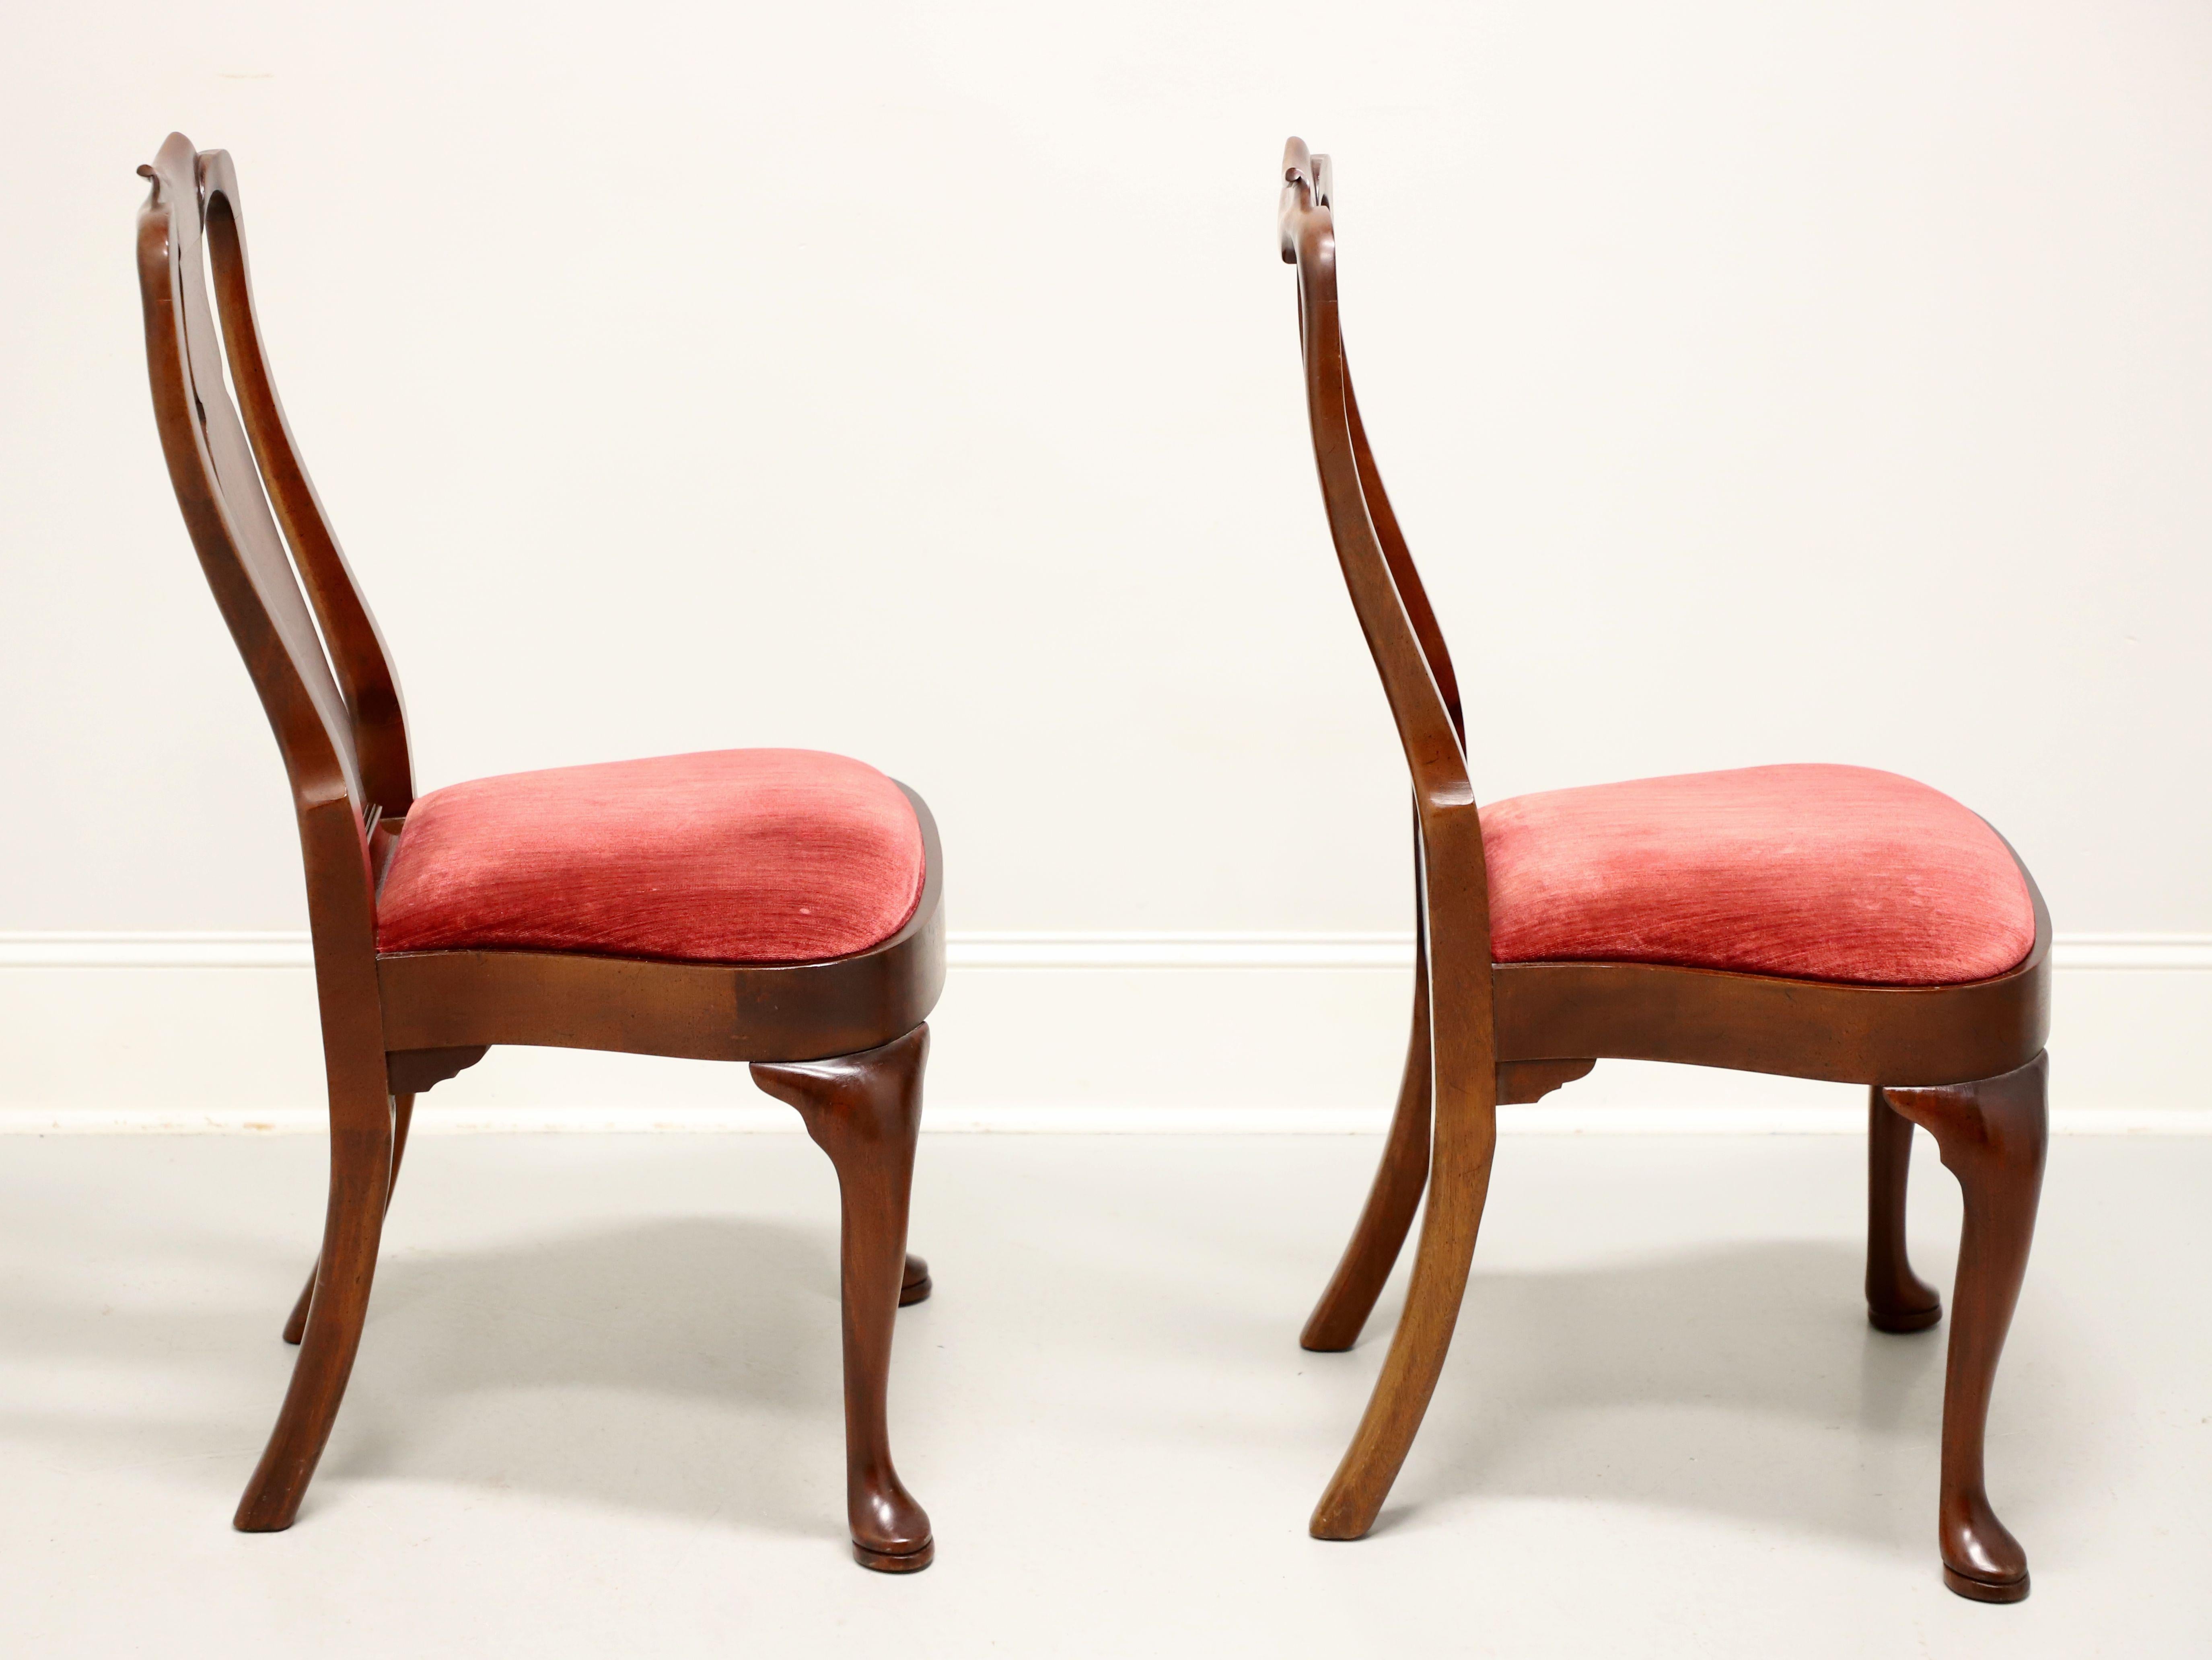 HICKORY CHAIR Mahogany Queen Anne Dining Side Chairs - Pair C In Good Condition For Sale In Charlotte, NC